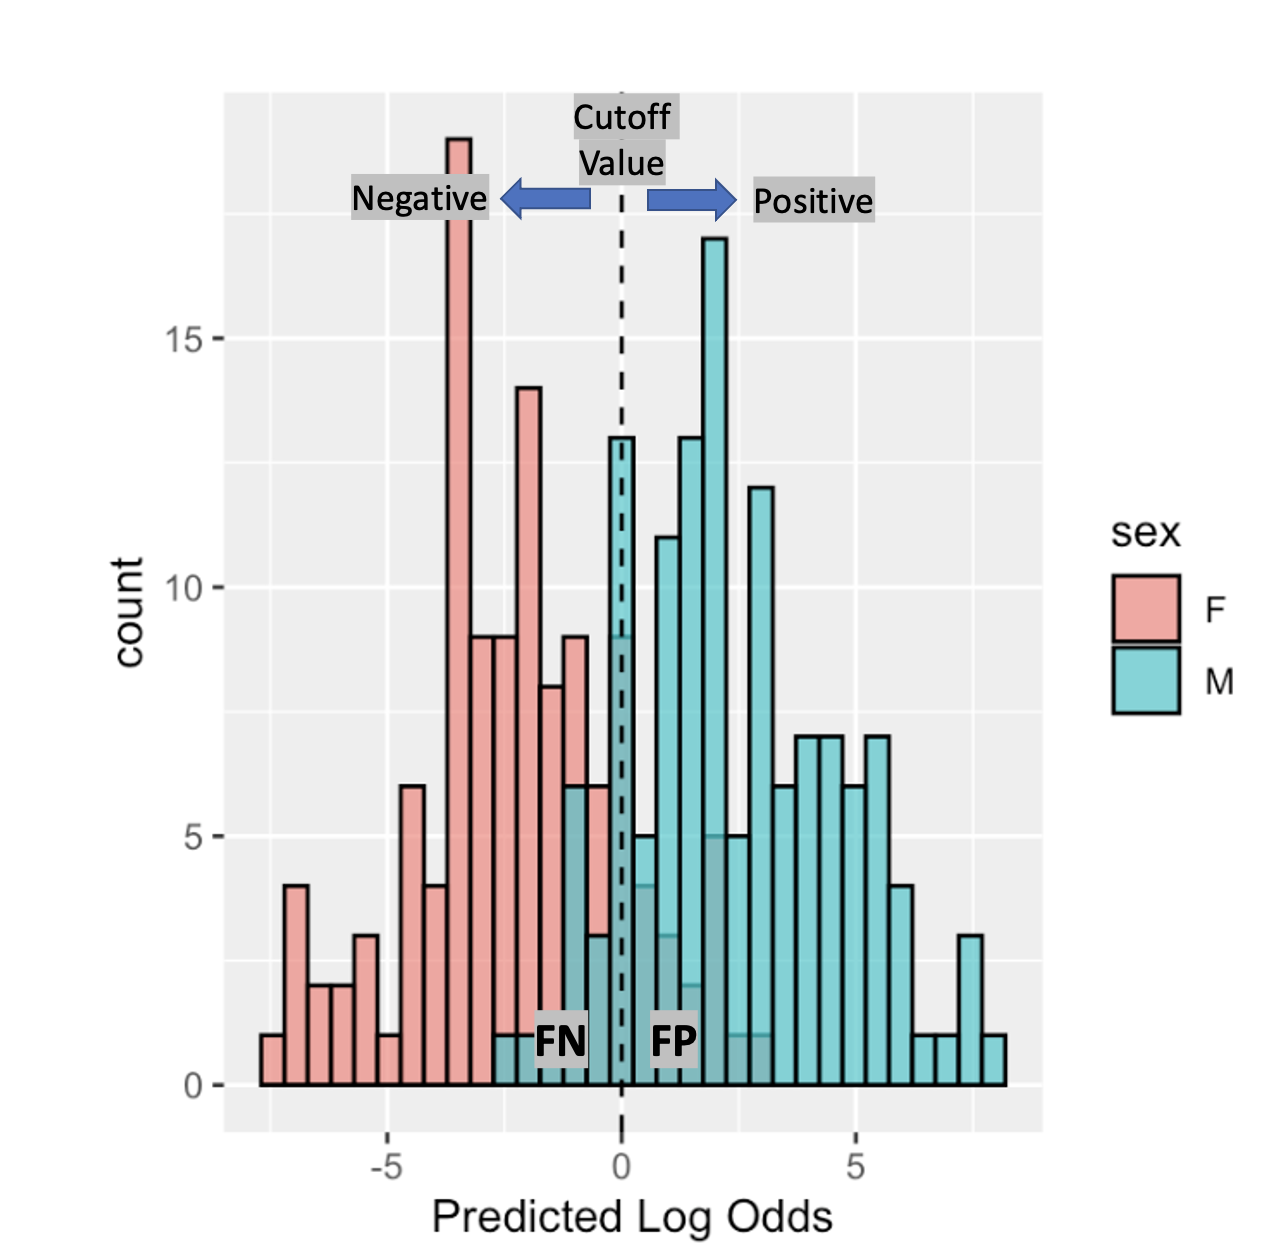 When informative, a classifier score separates to some extent the positive from the negative class. Such can be seen in the logistic regression model for sex prediction given height. The choice of a classification cutoff leads to various types of correct and incorrect predictions.